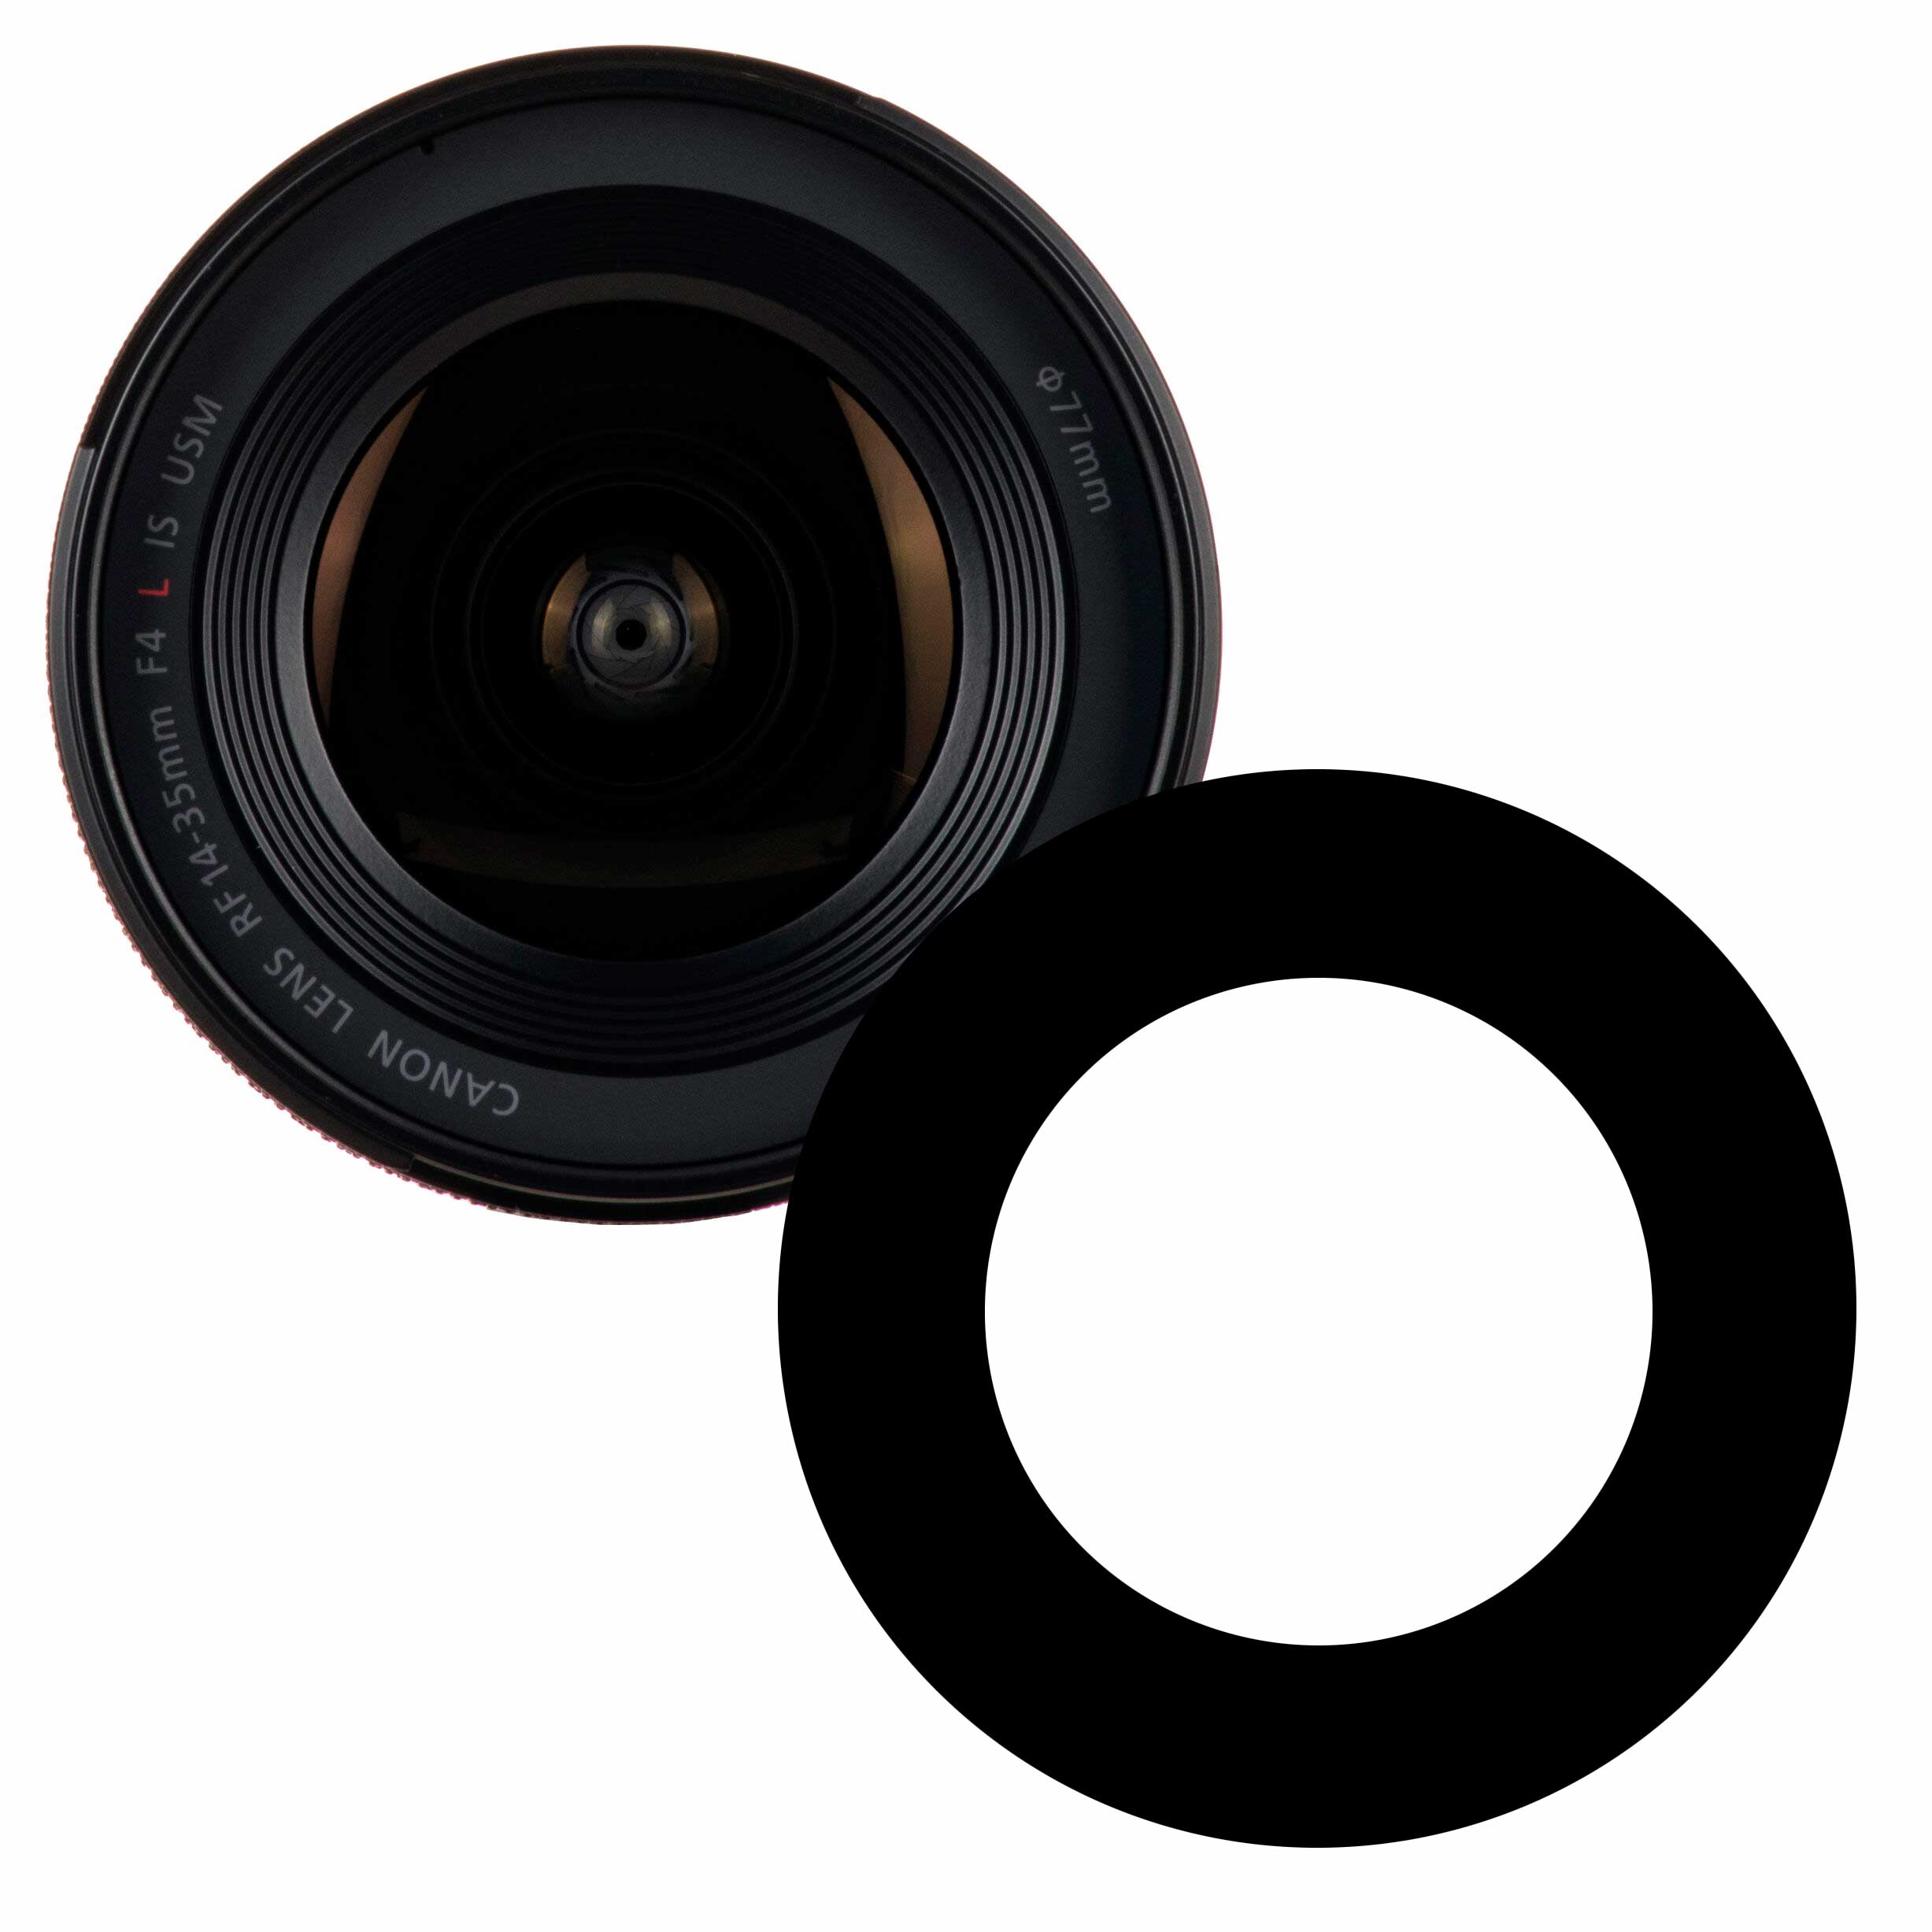 Anti-Reflection Ring for Canon RF 14-35mm f/4L Lens